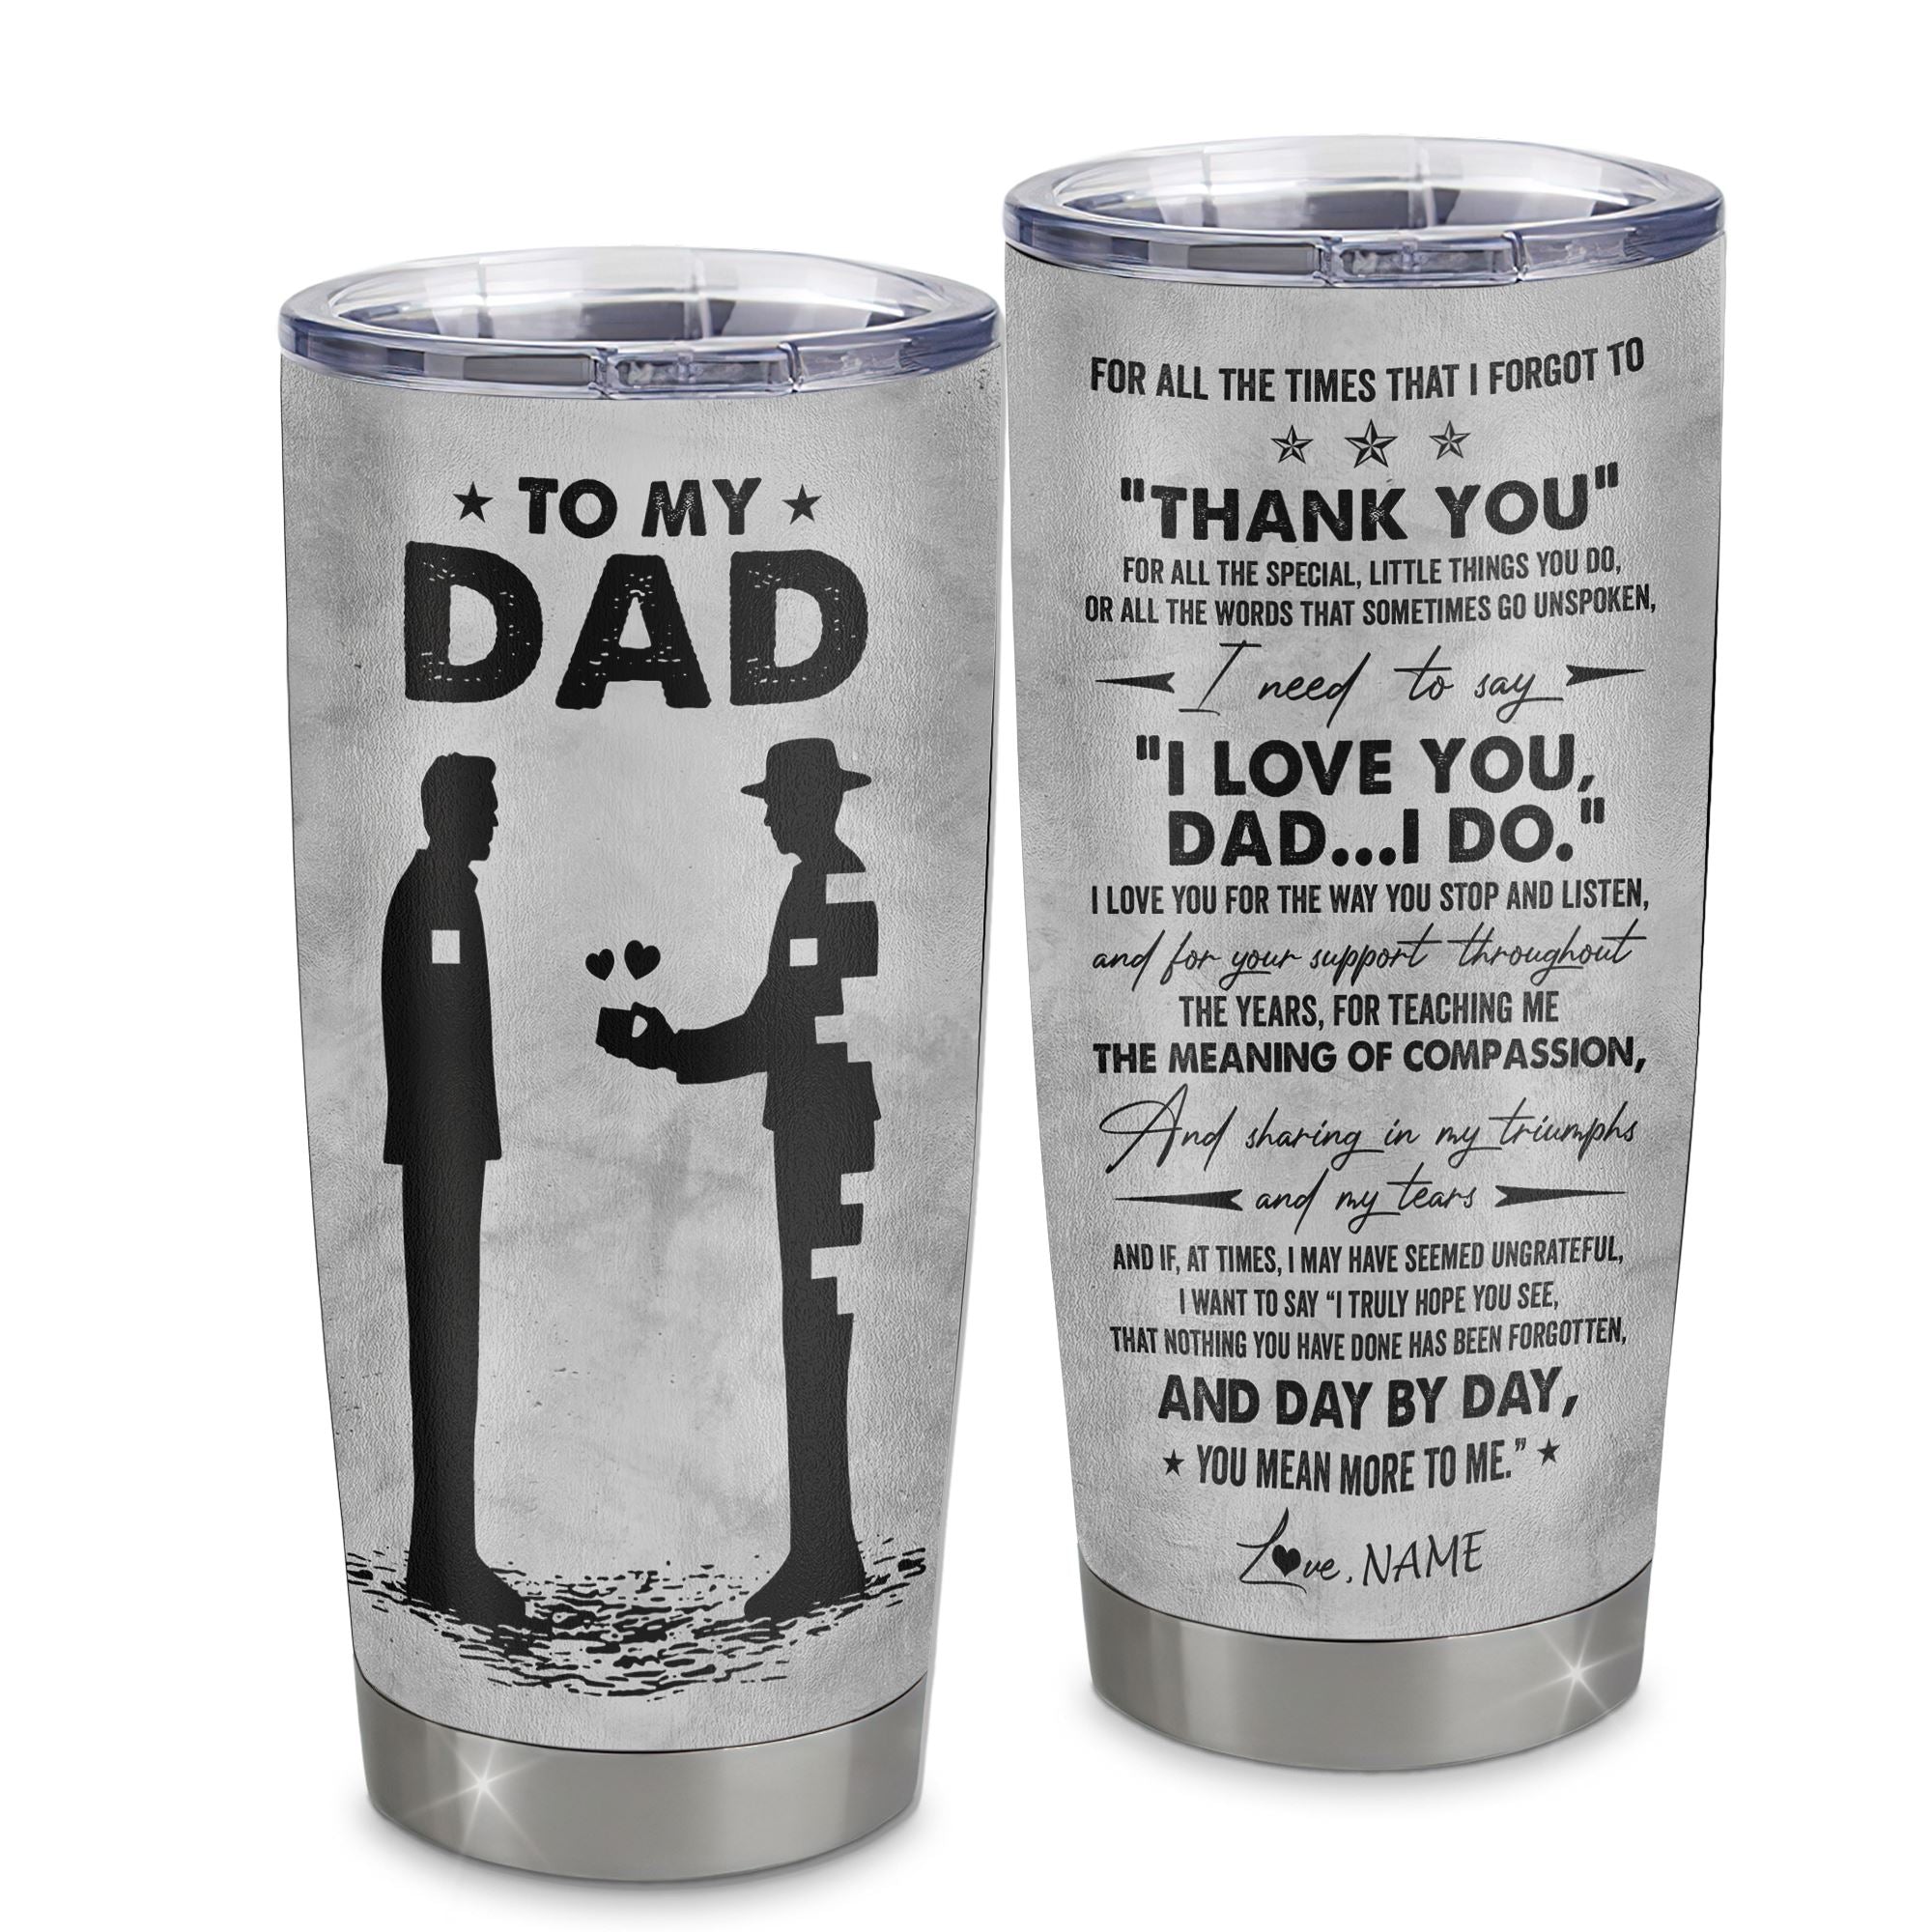 Personalized_To_My_Dad_From_Son_Stainless_Steel_Tumbler_Cup_Thank_You_Father_And_Son_Dad_Fathers_Day_Birthday_Christmas_Travel_Mug_Tumbler_mockup_1.jpg